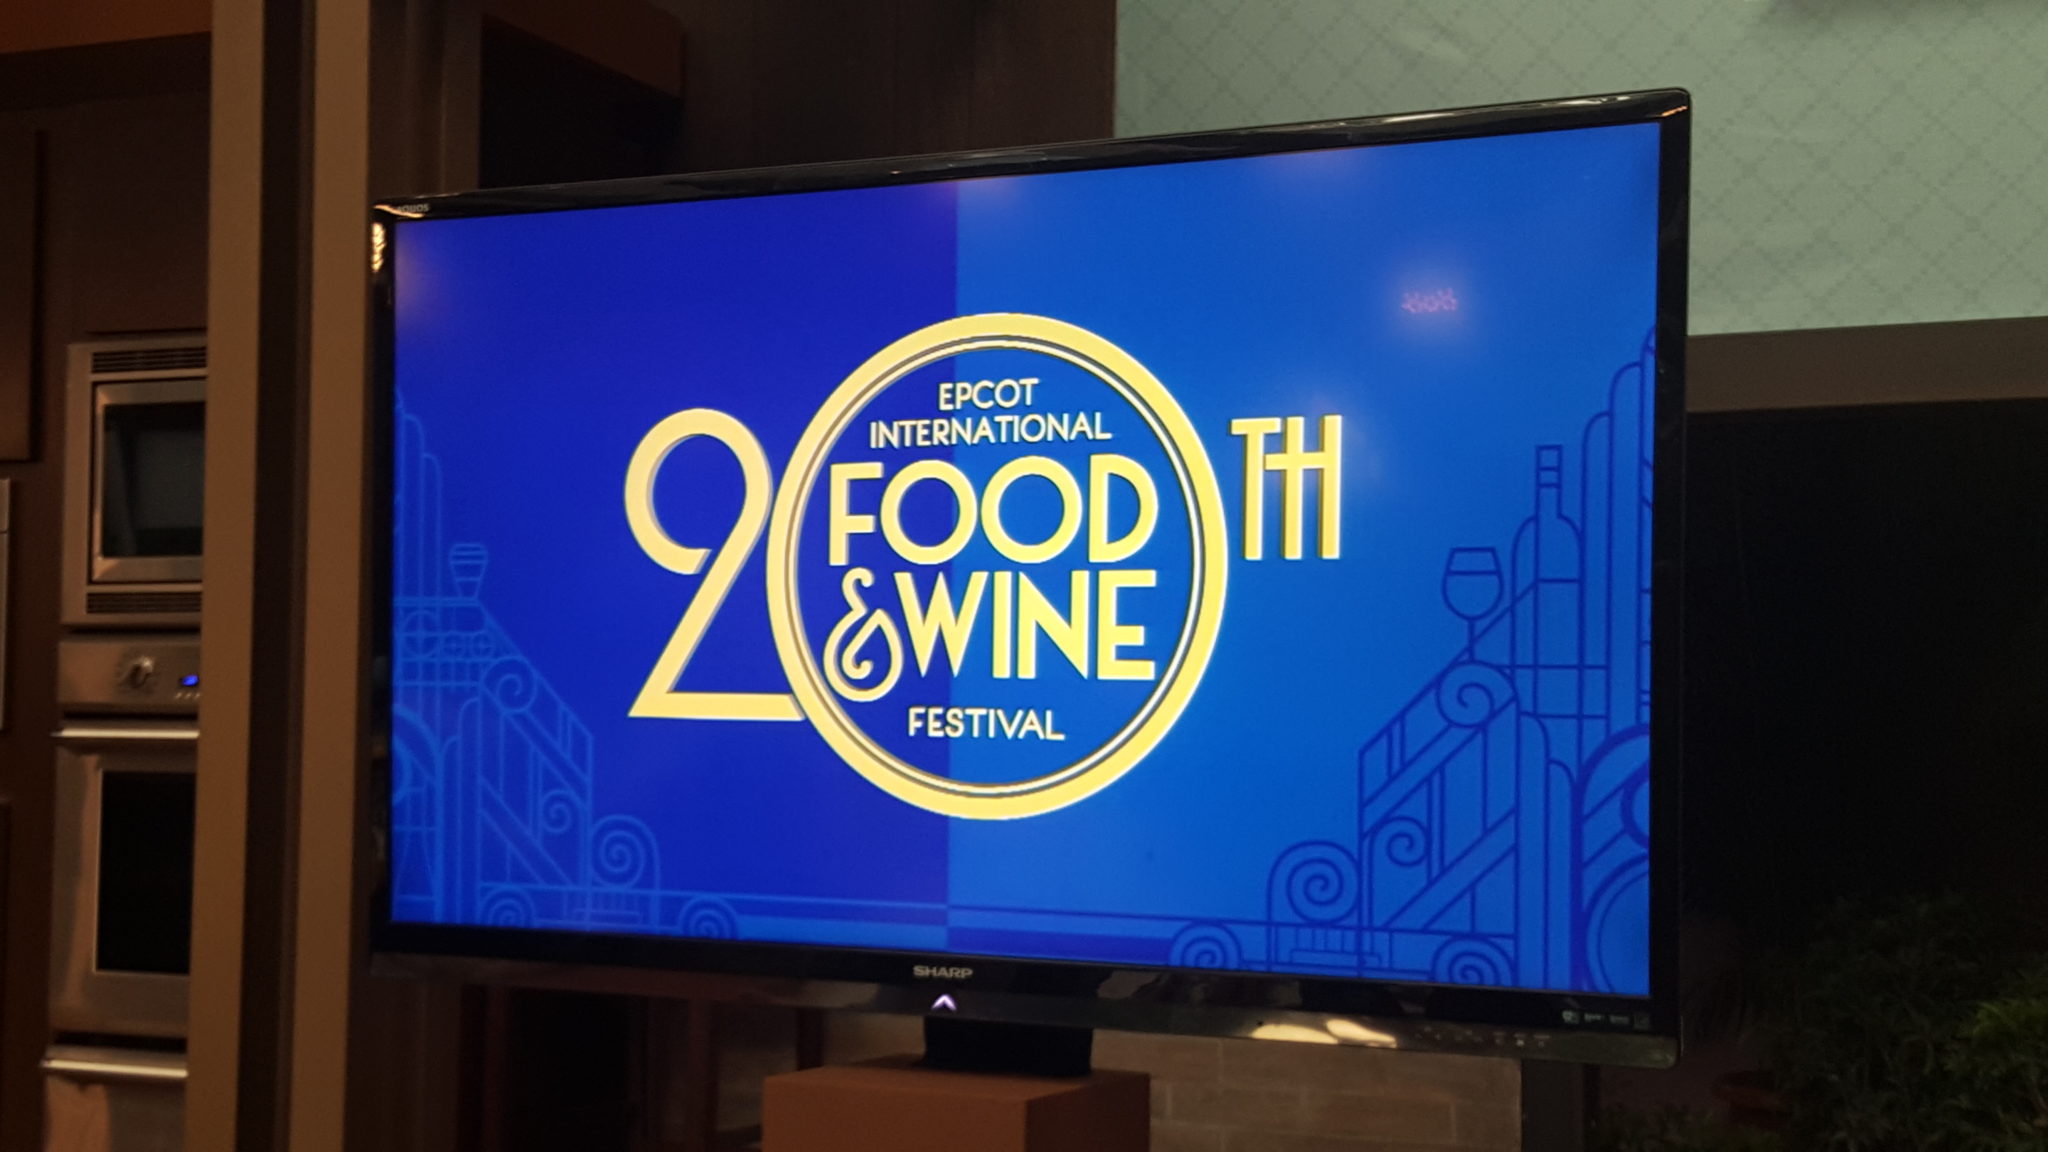 Disney Announces Epcot International Food and Wine Festival Celebrity Chefs and the Expansion of the Festival into the Resorts